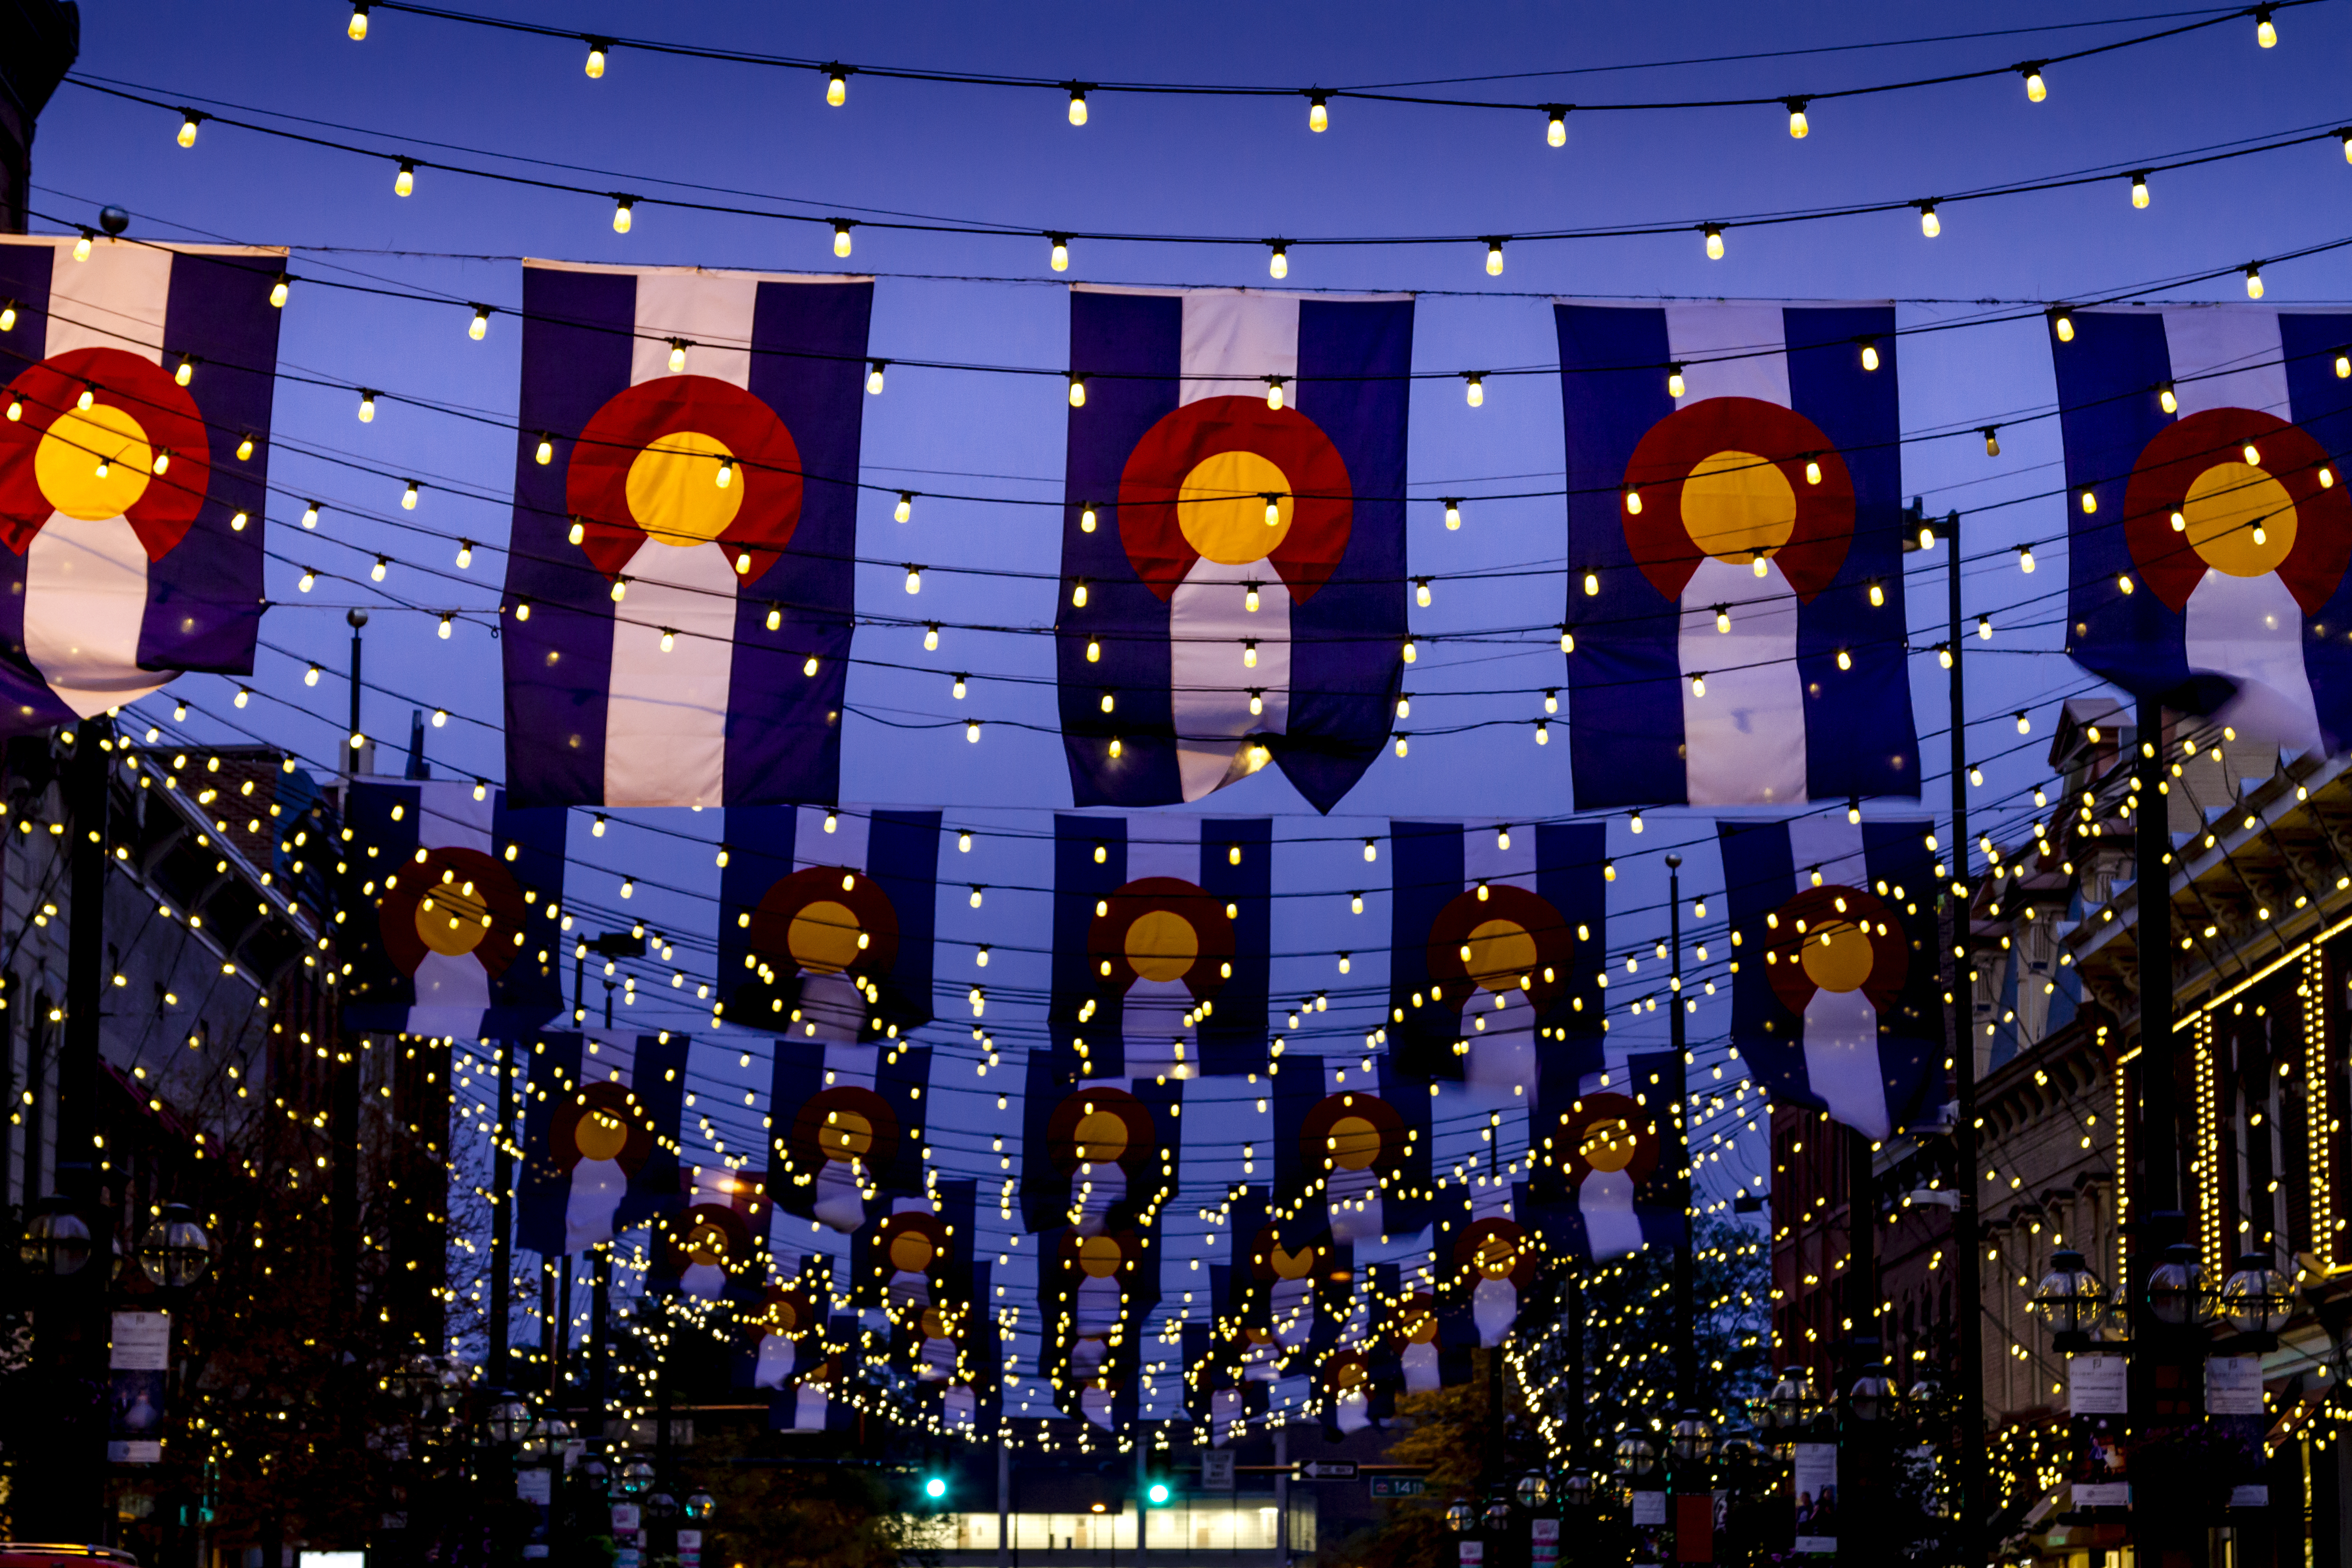 nighttime photo of colorado flags with string lights